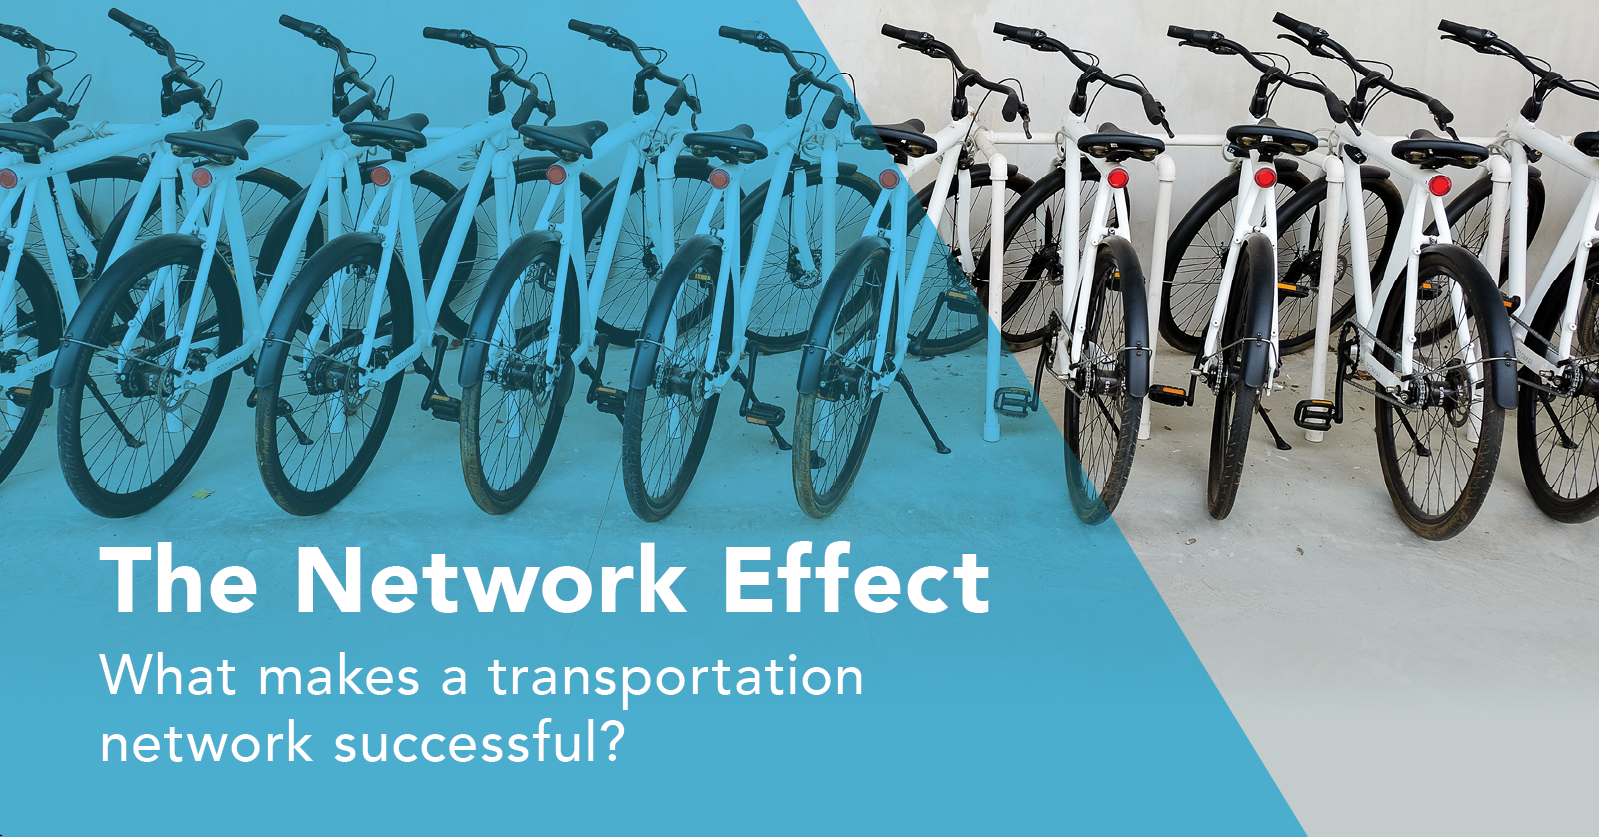 The Network Effect: What makes a transportation network successful?